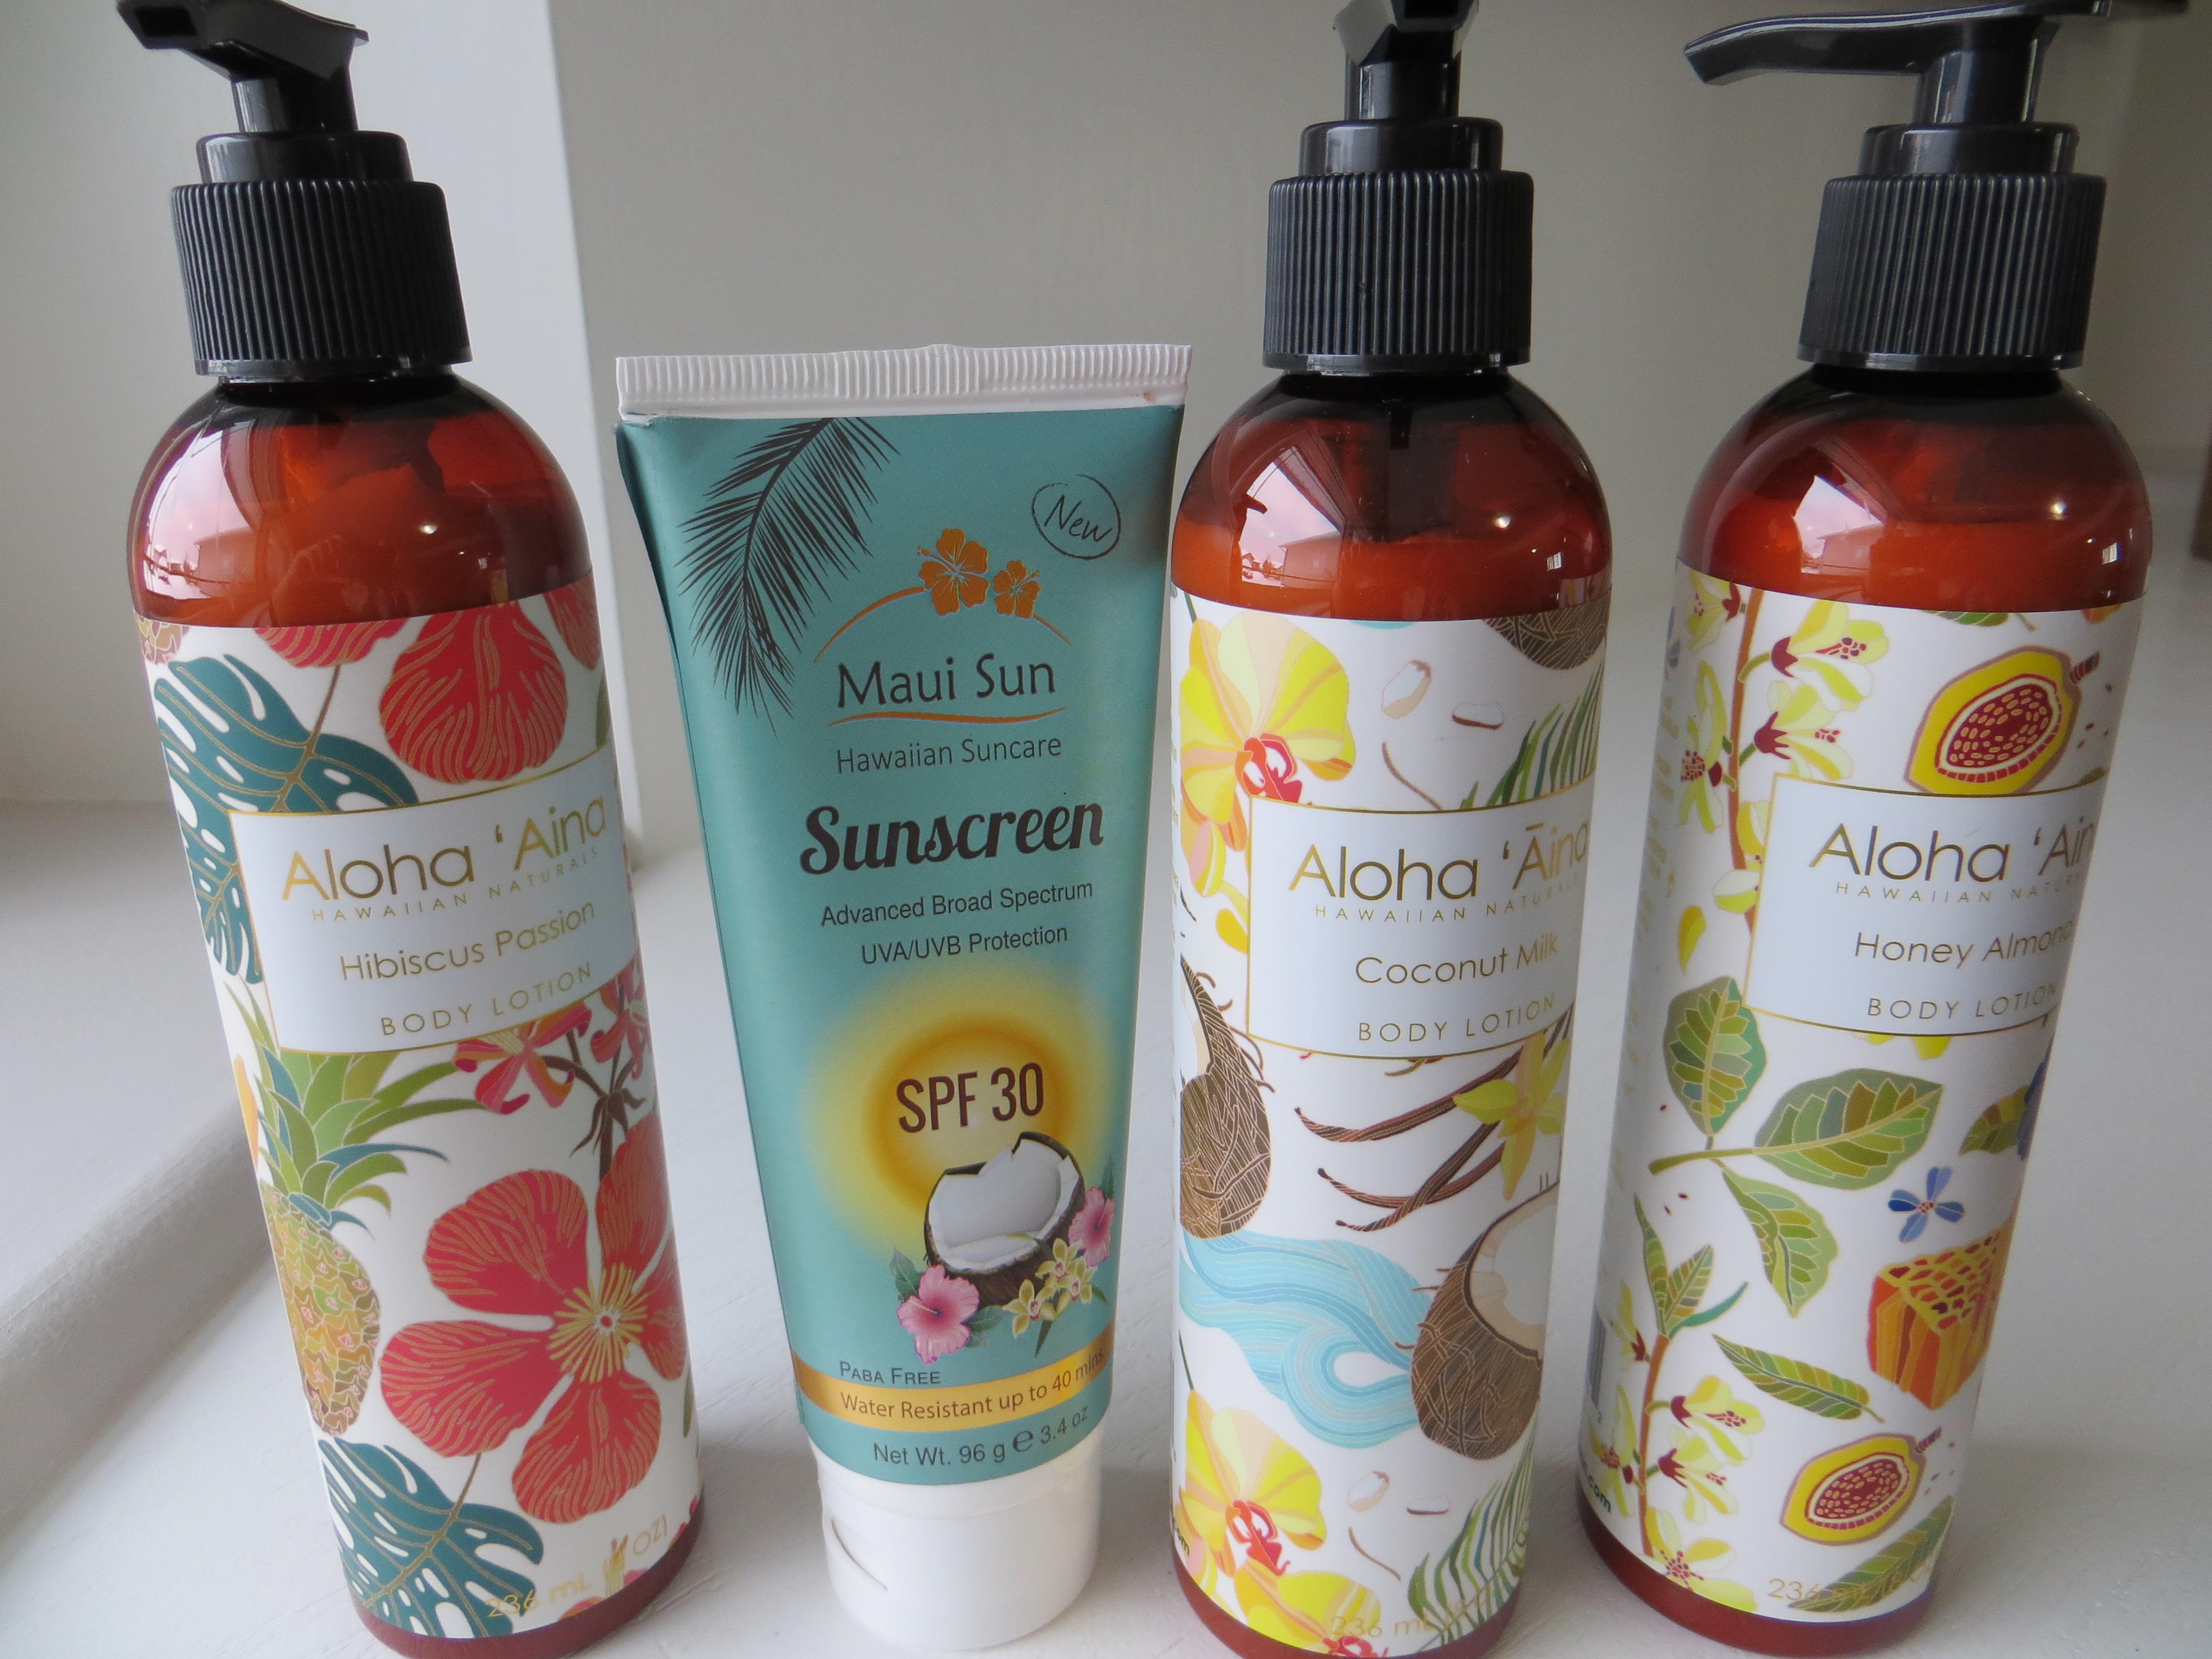 Lotions & Sunscreen from Hawaii